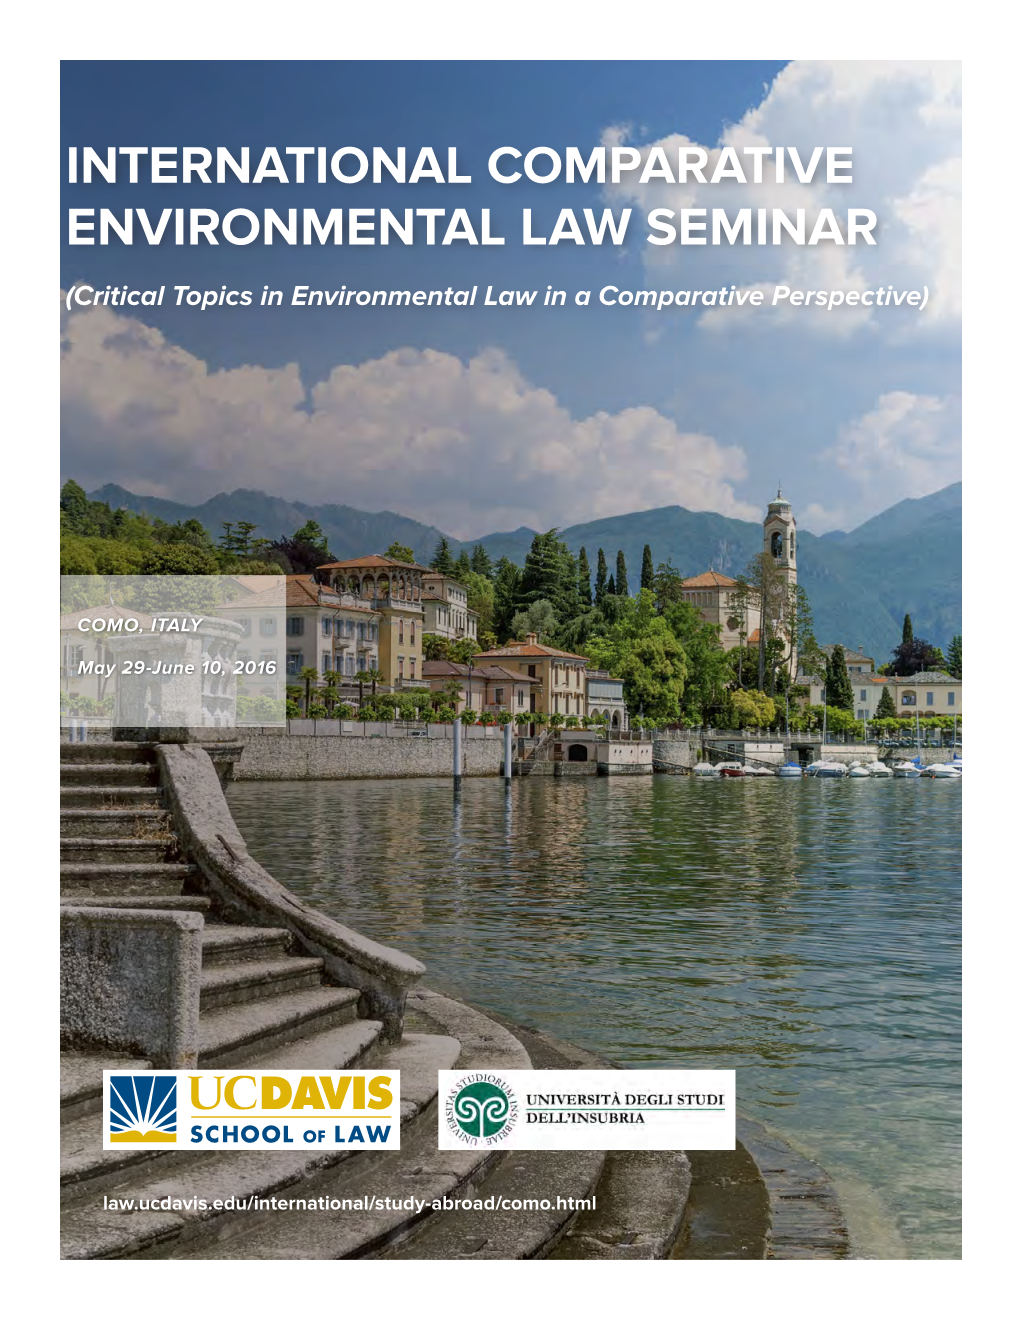 INTERNATIONAL COMPARATIVE ENVIRONMENTAL LAW SEMINAR (Critical Topics in Environmental Law in a Comparative Perspective)